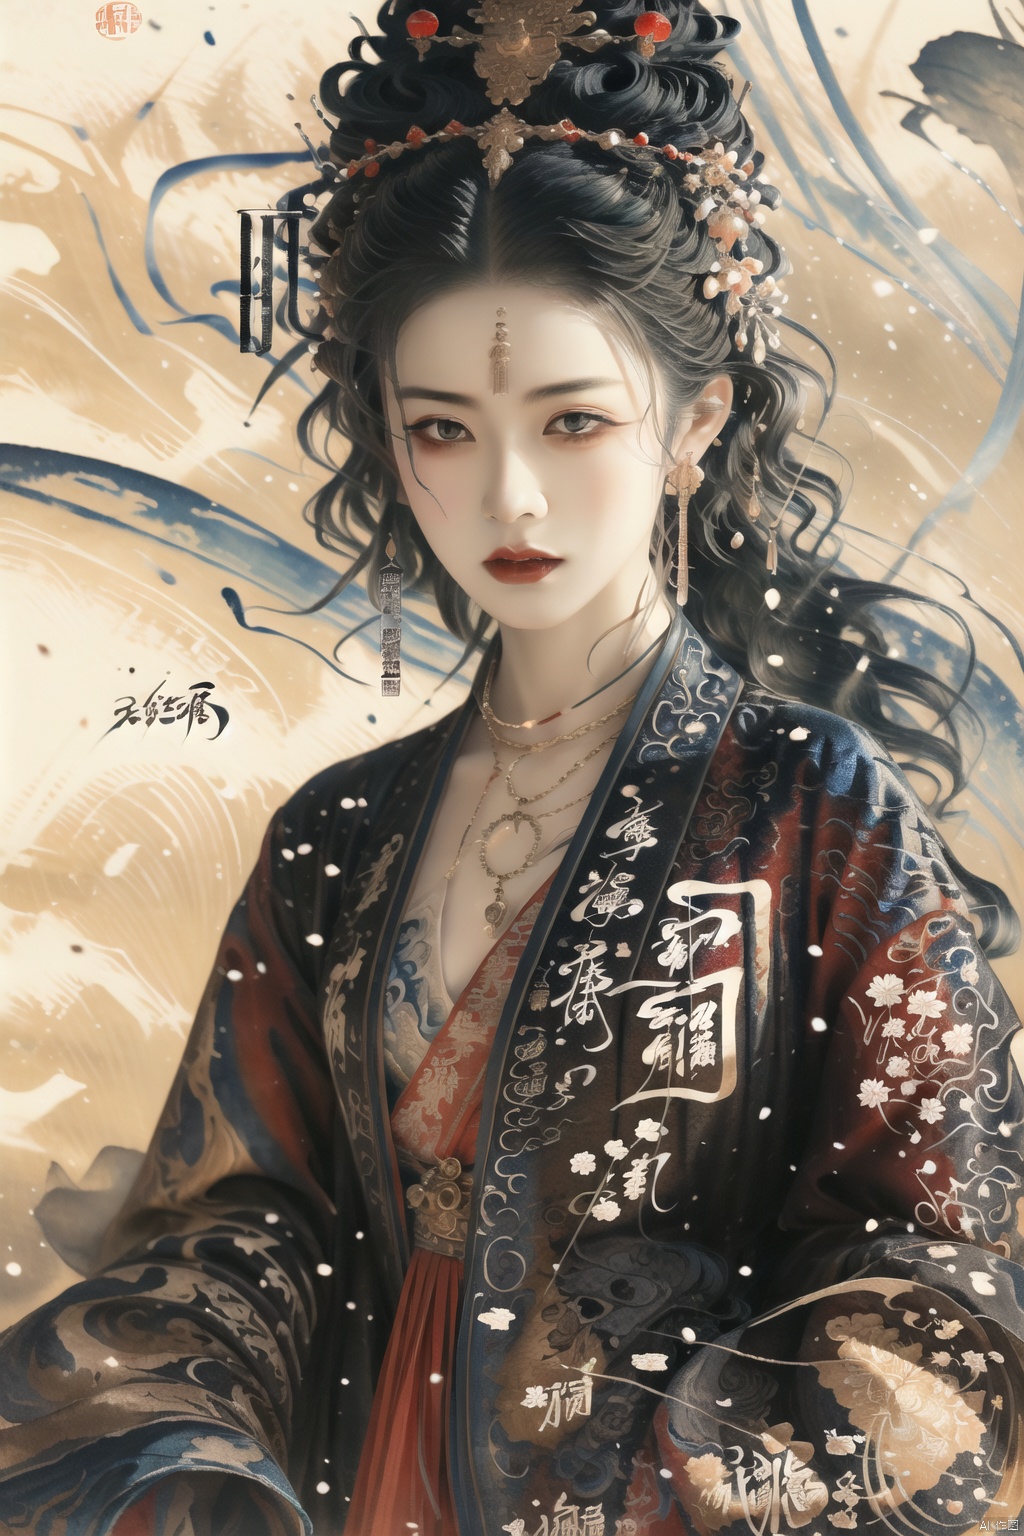  (dramatic, gritty, intense:1.4),masterpiece, best quality,8k, insane details,hyper quality,ultra detailed, Masterpiece,(calligraphy:1.4),(ether colorful ink flowing:1.3),1girl,A shot with tension,white hair,exposed collarbone,sideways,Simple background, Ink scattering_Chinese style,yjmonochrome,Ink and wash style, fenhong, 1girl, Gothic, lotus leaf, Ultra-detail green Chinese dragon, linkedress_red dress